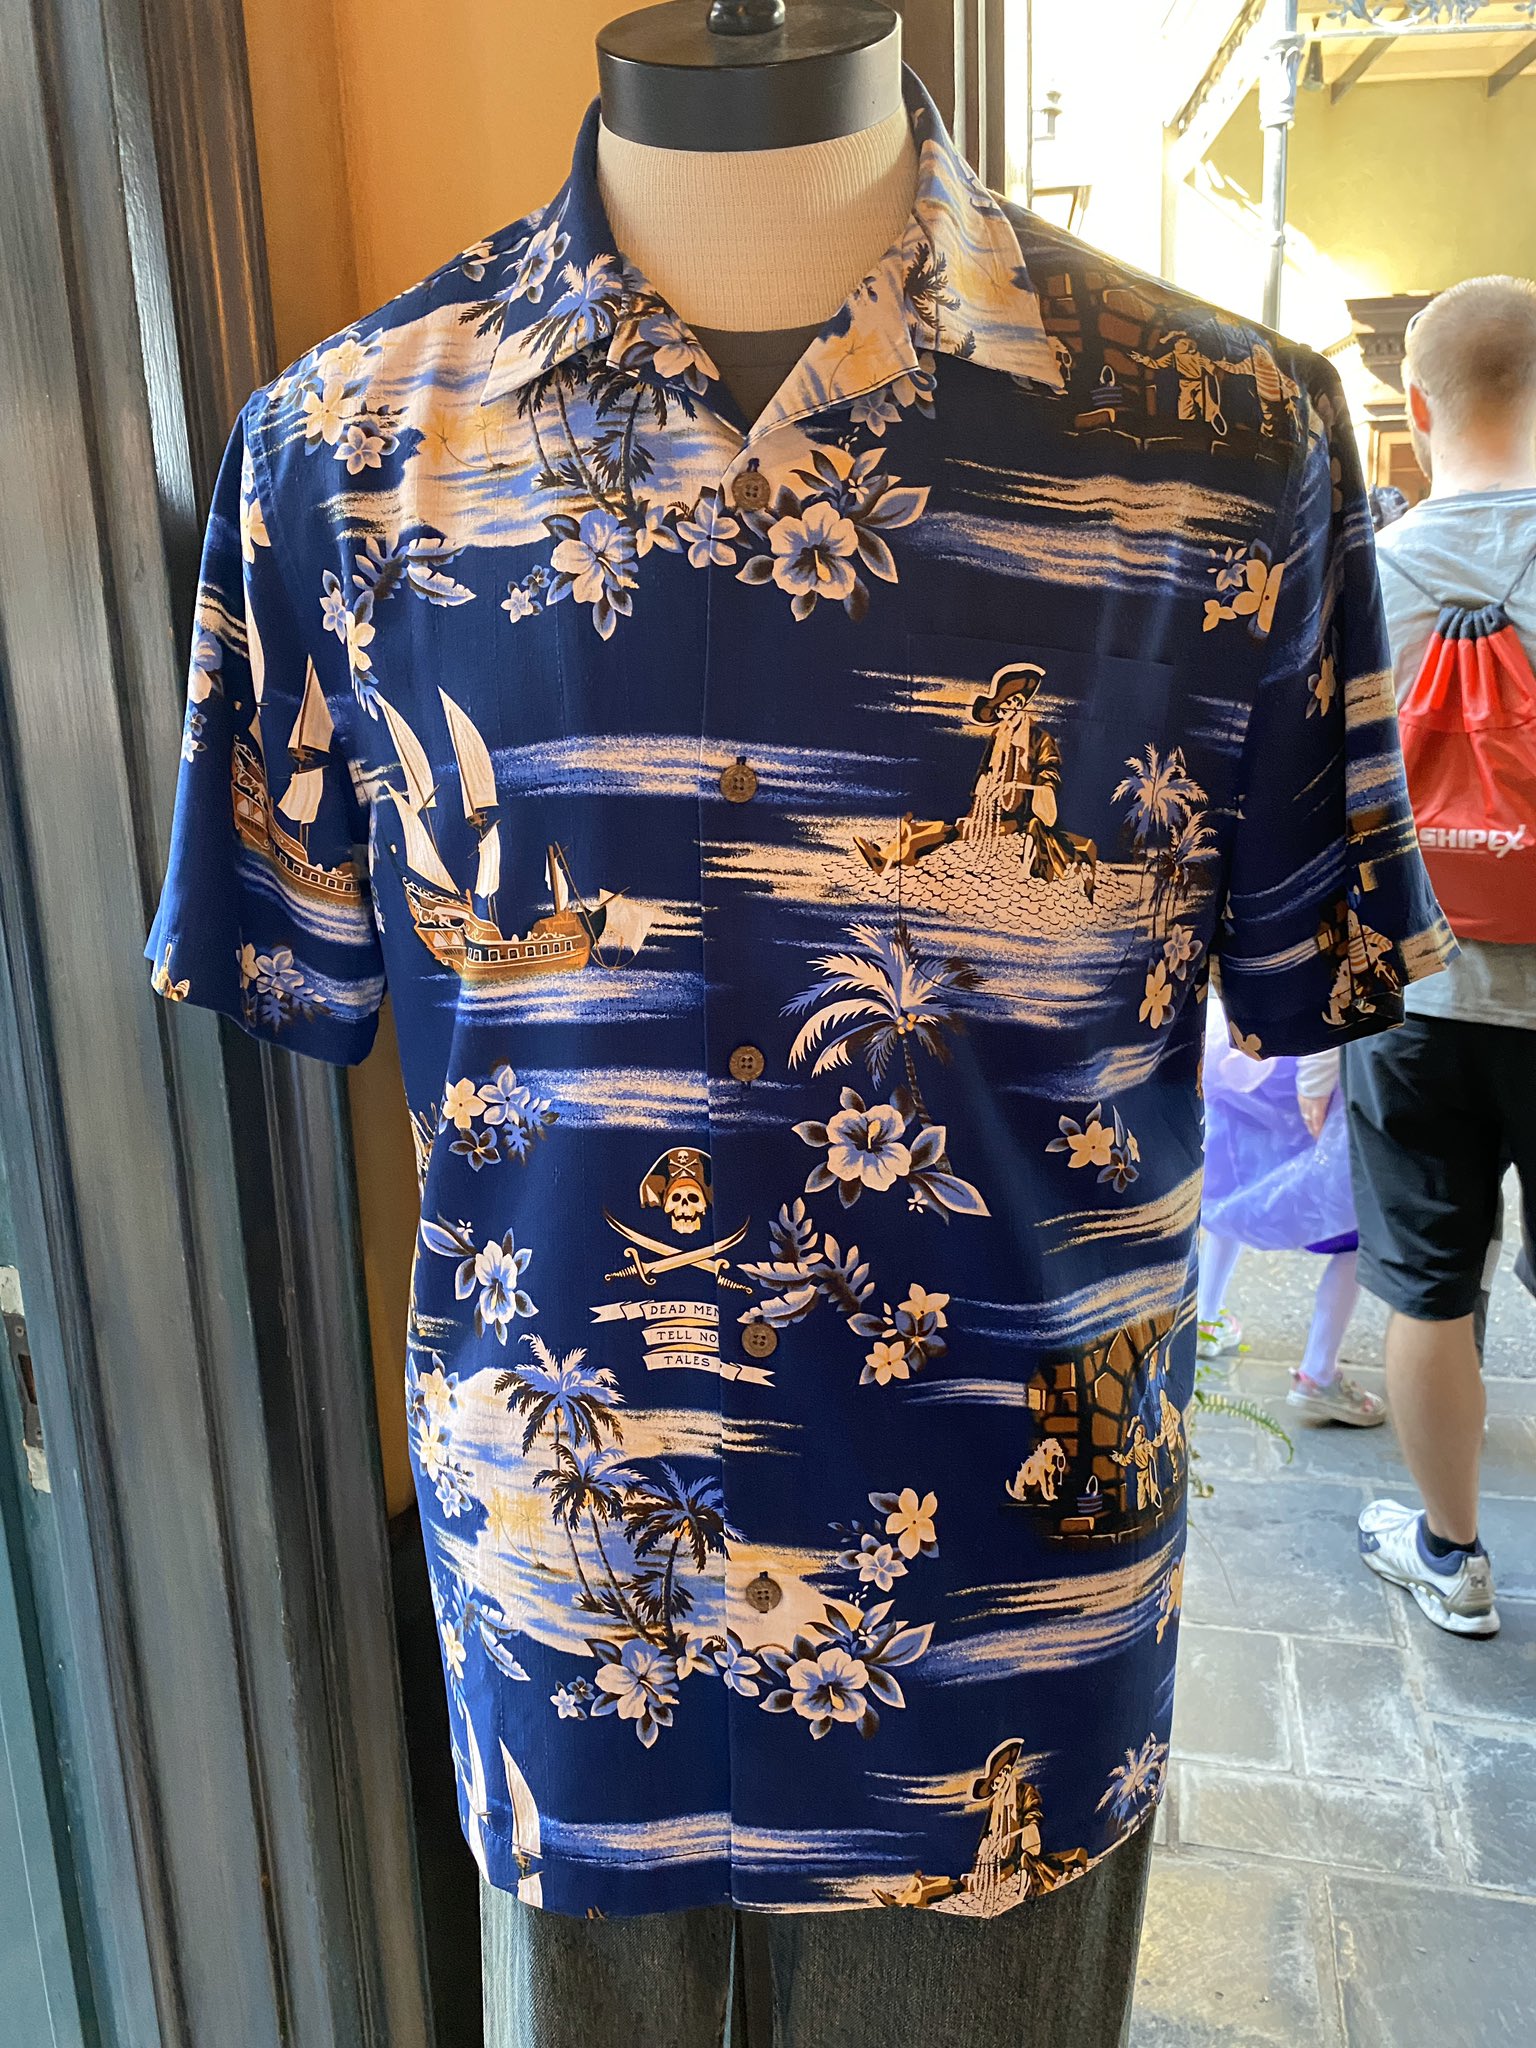 LaughingPlace.com on X: NEW MERCHANDISE - @TommyBahama Pirates of the  Caribbean camp shirt for $150.00 at Disneyland #Disneyland #pirates  #tommybahama  / X